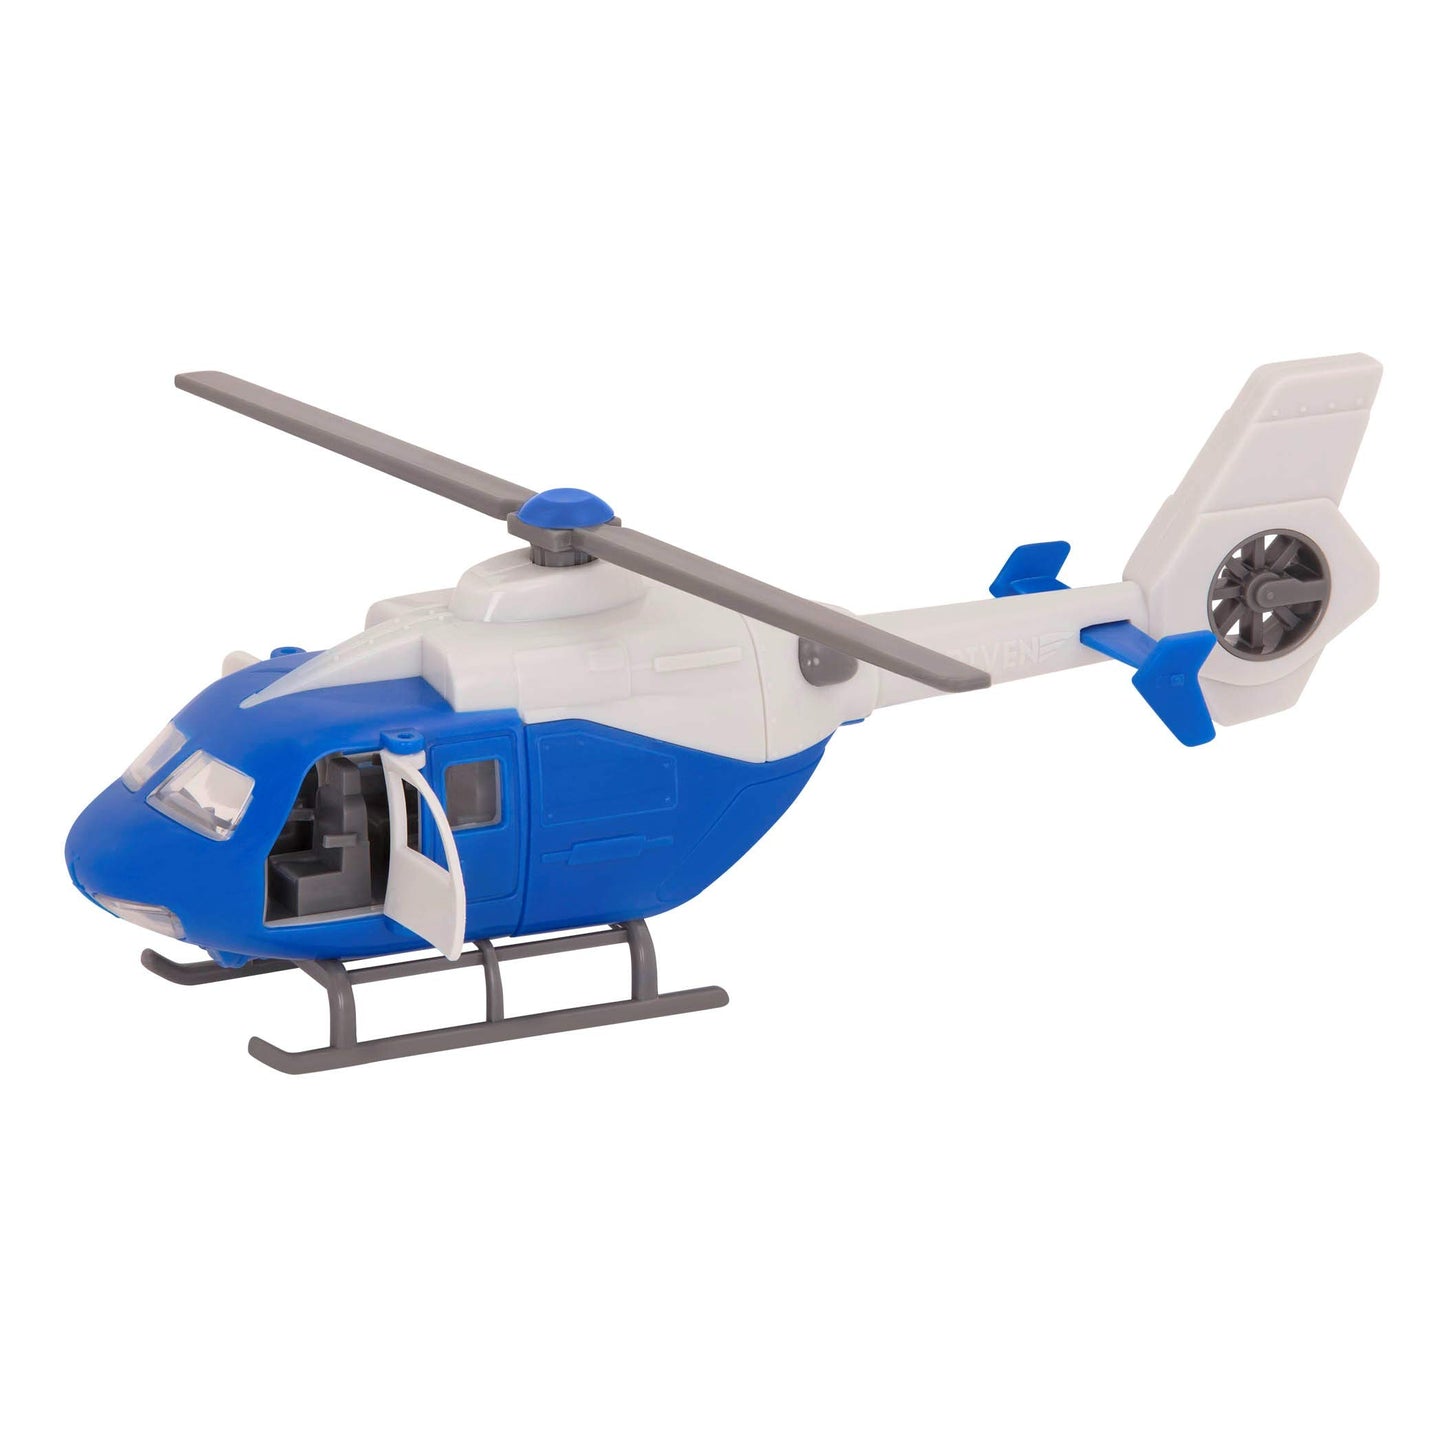 [Driven by Battat] Micro Series Helicopter with Realistic Lights & Sounds